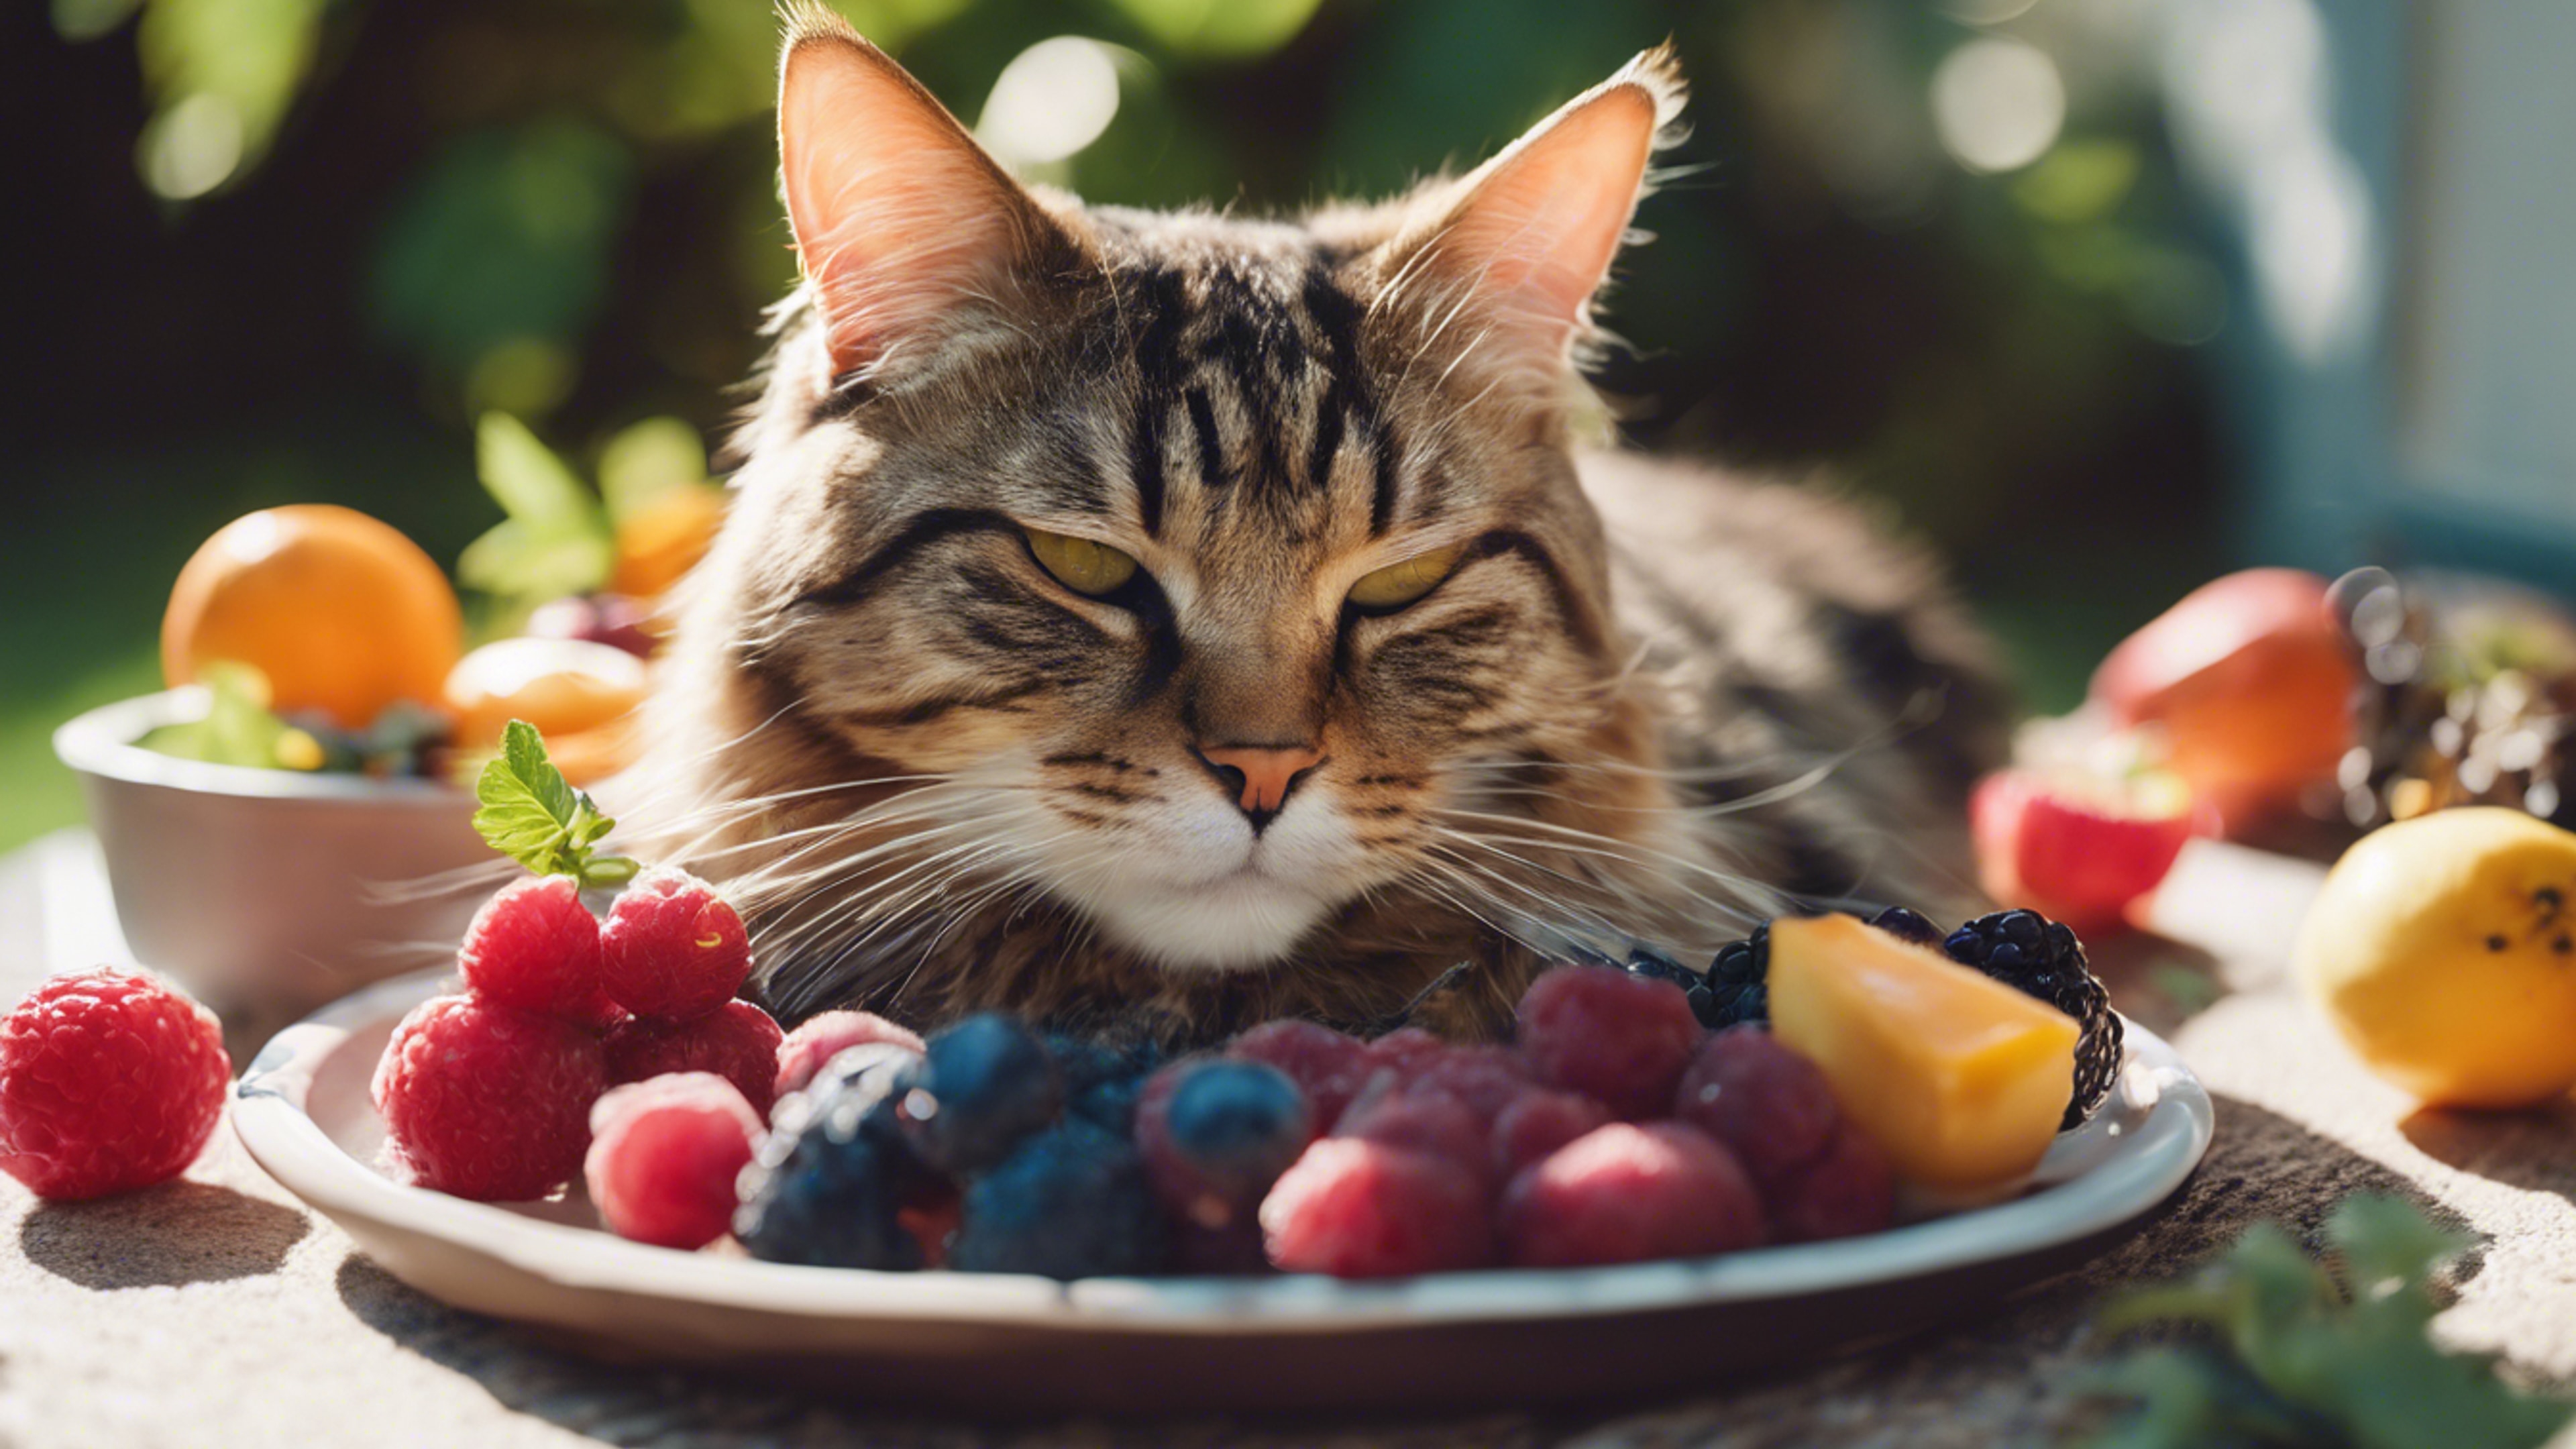 A sleepy Maine Coon cat relaxing next to a bowl of vibrant summer fruits. Tapeta[5a3905f0581c45108121]